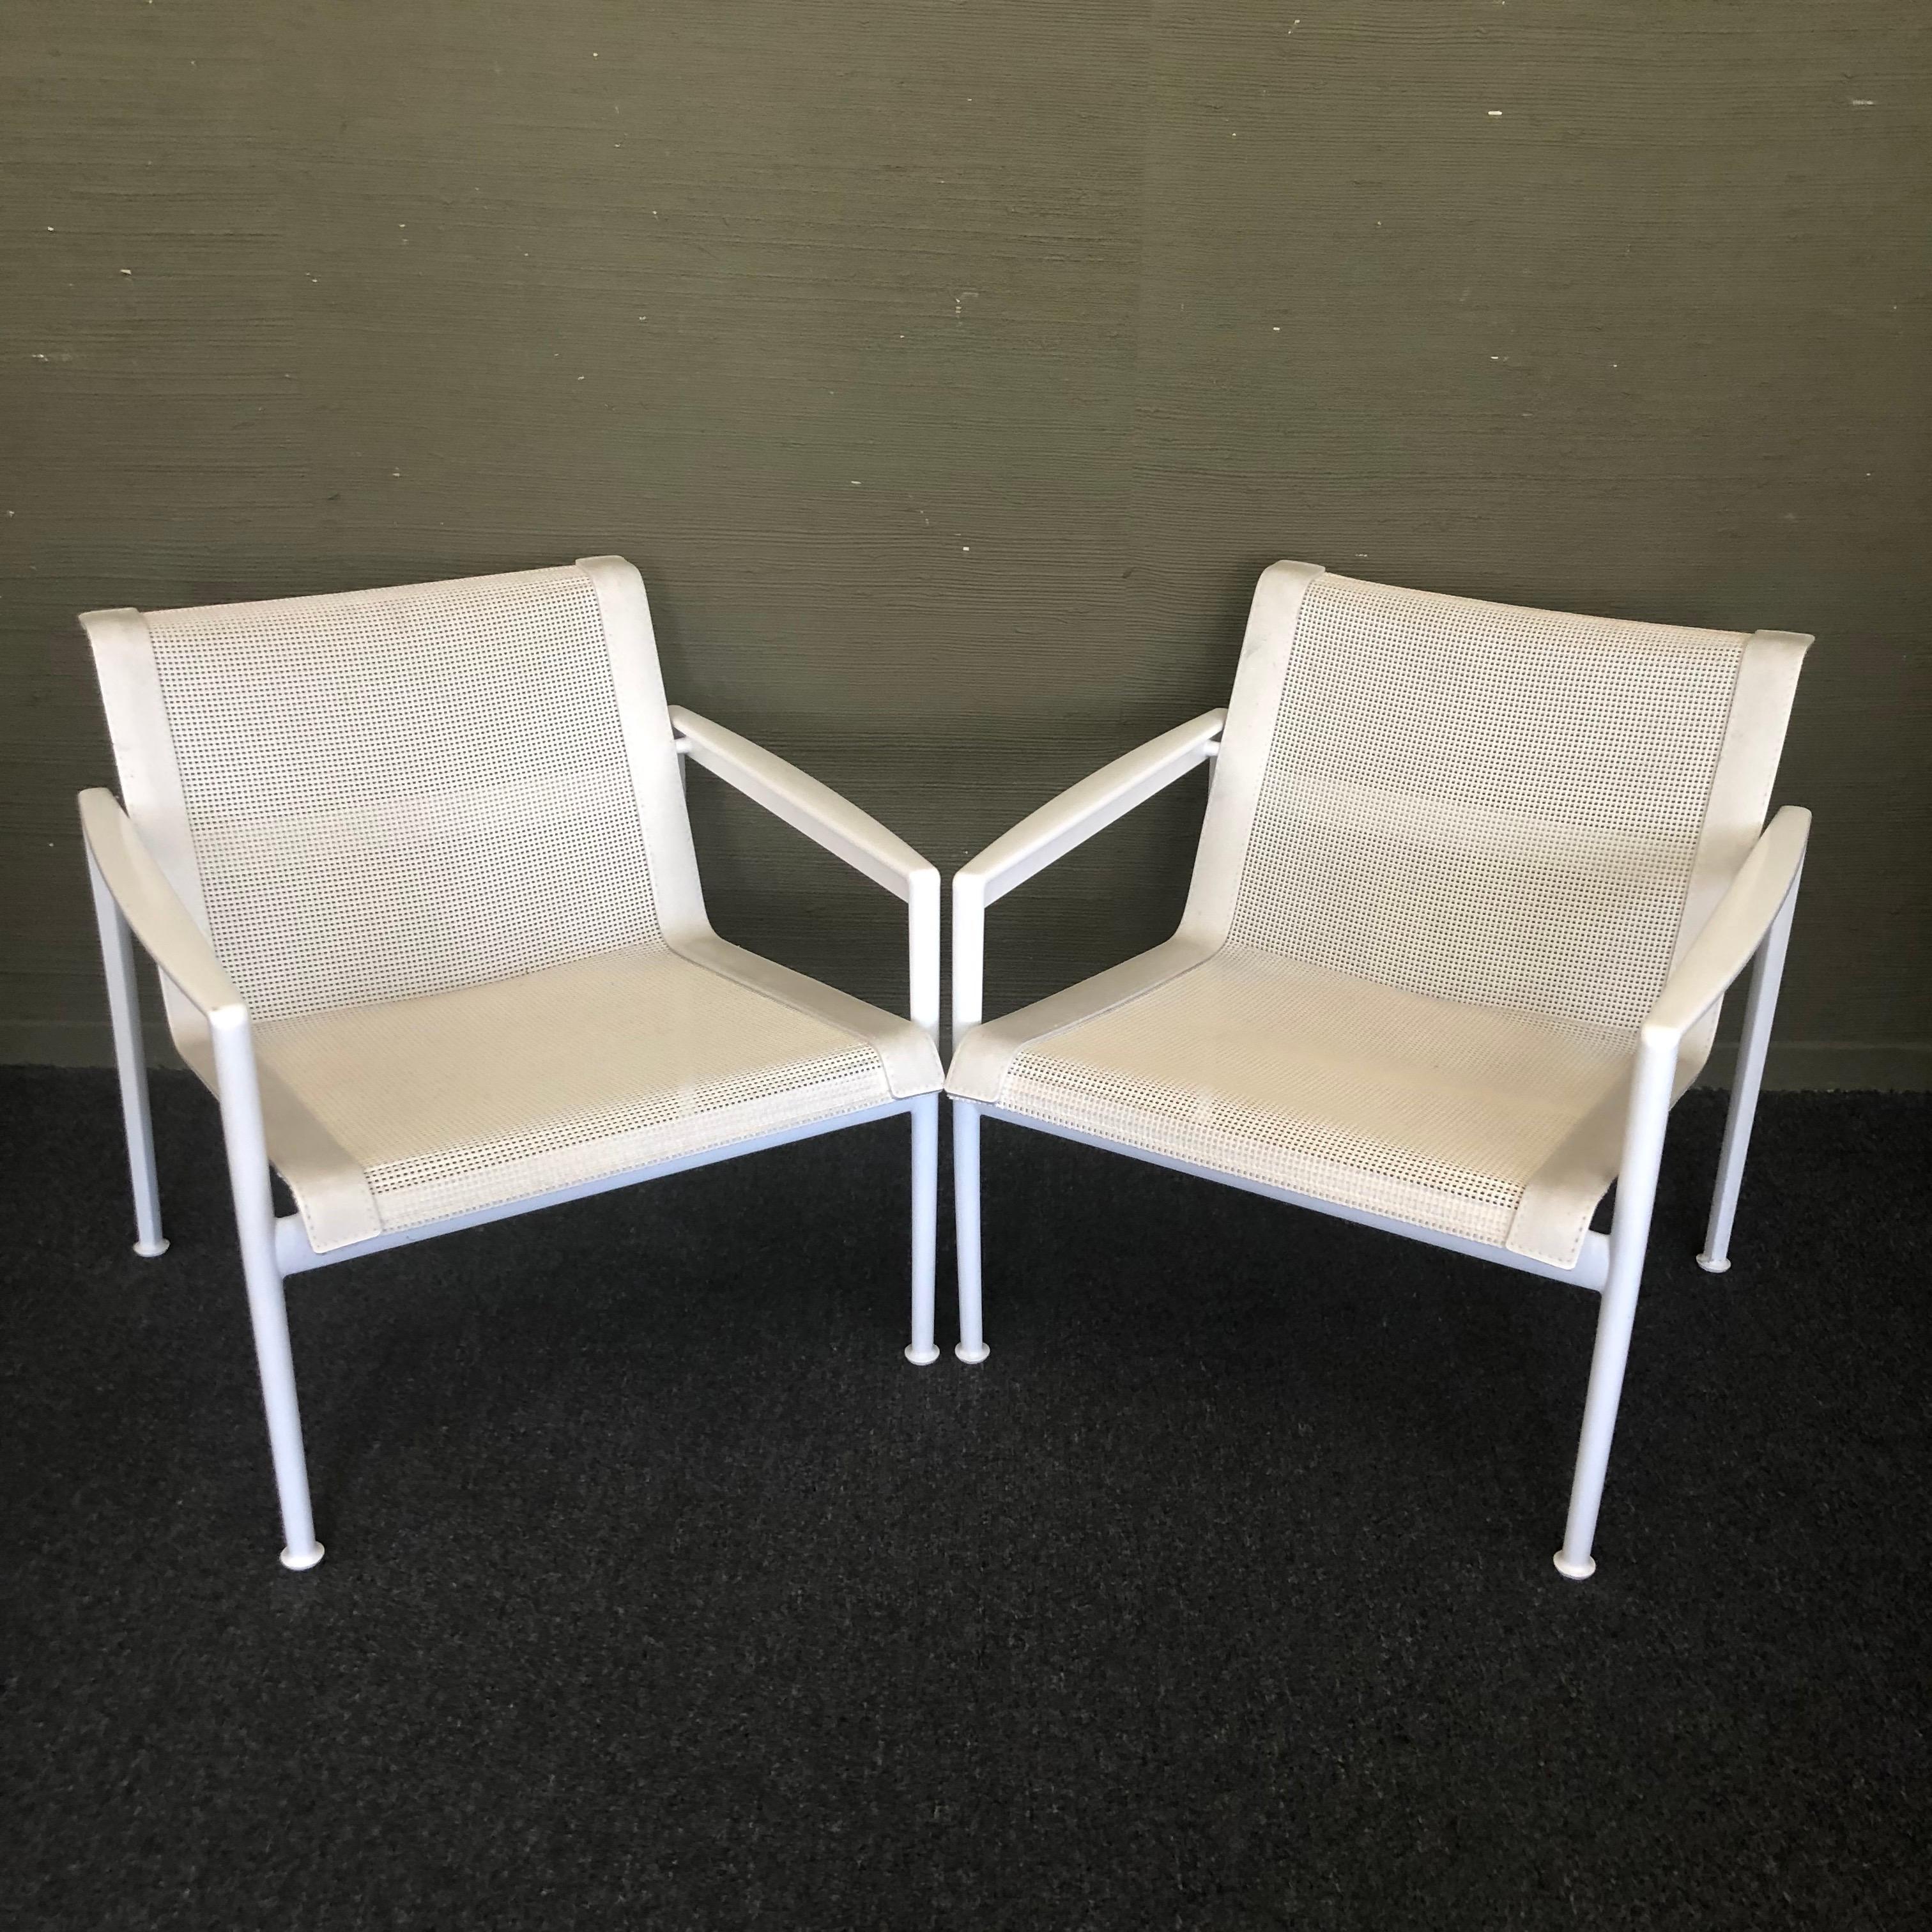 Aluminum Pair of Sling Lounge Chairs by Richard Schultz for Knoll 1966 Collection